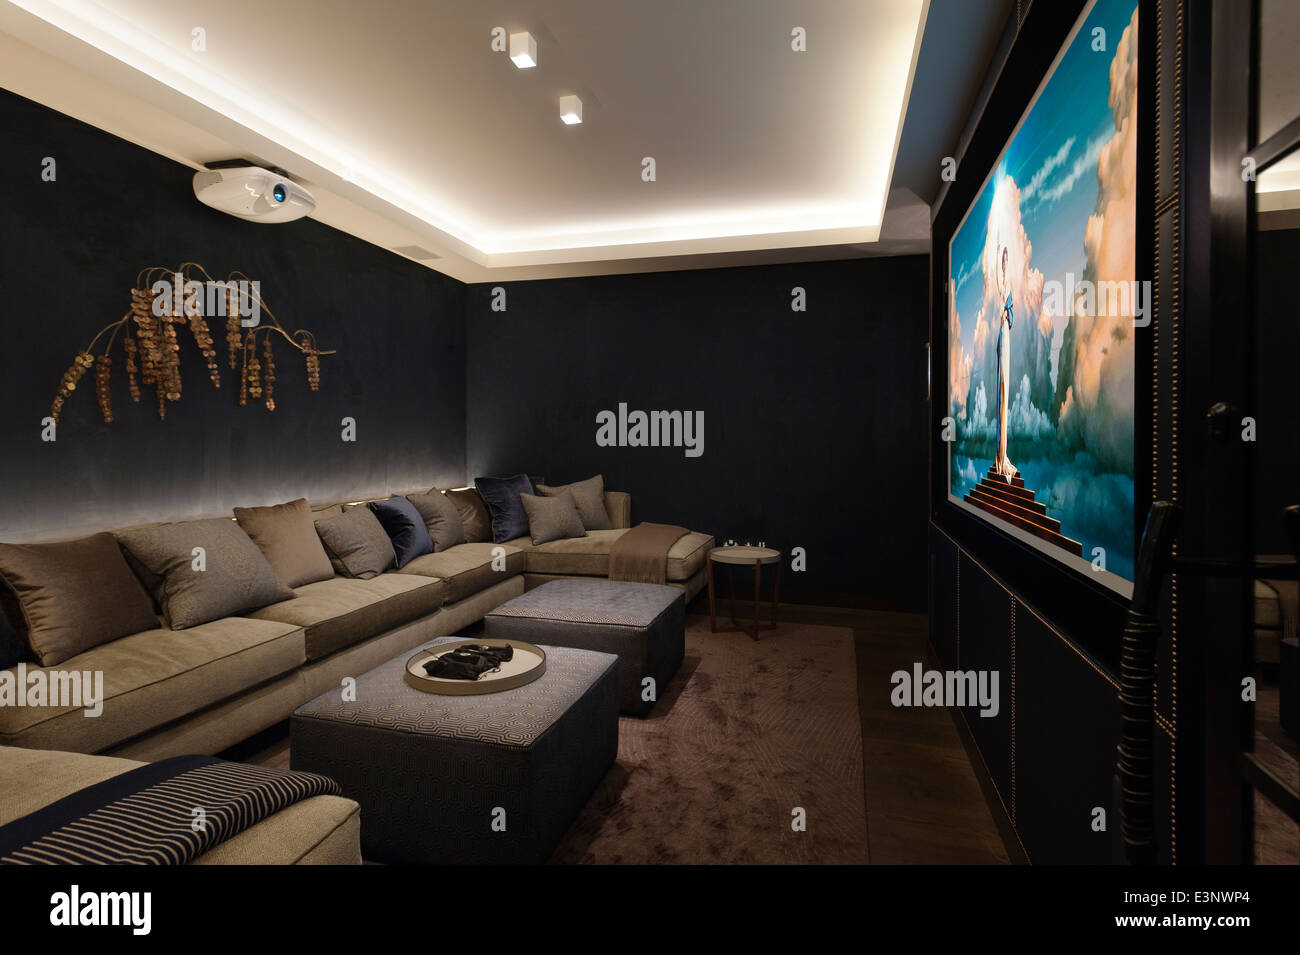 Chic home cinema in dark tones and extended sofa seating Stock Photo